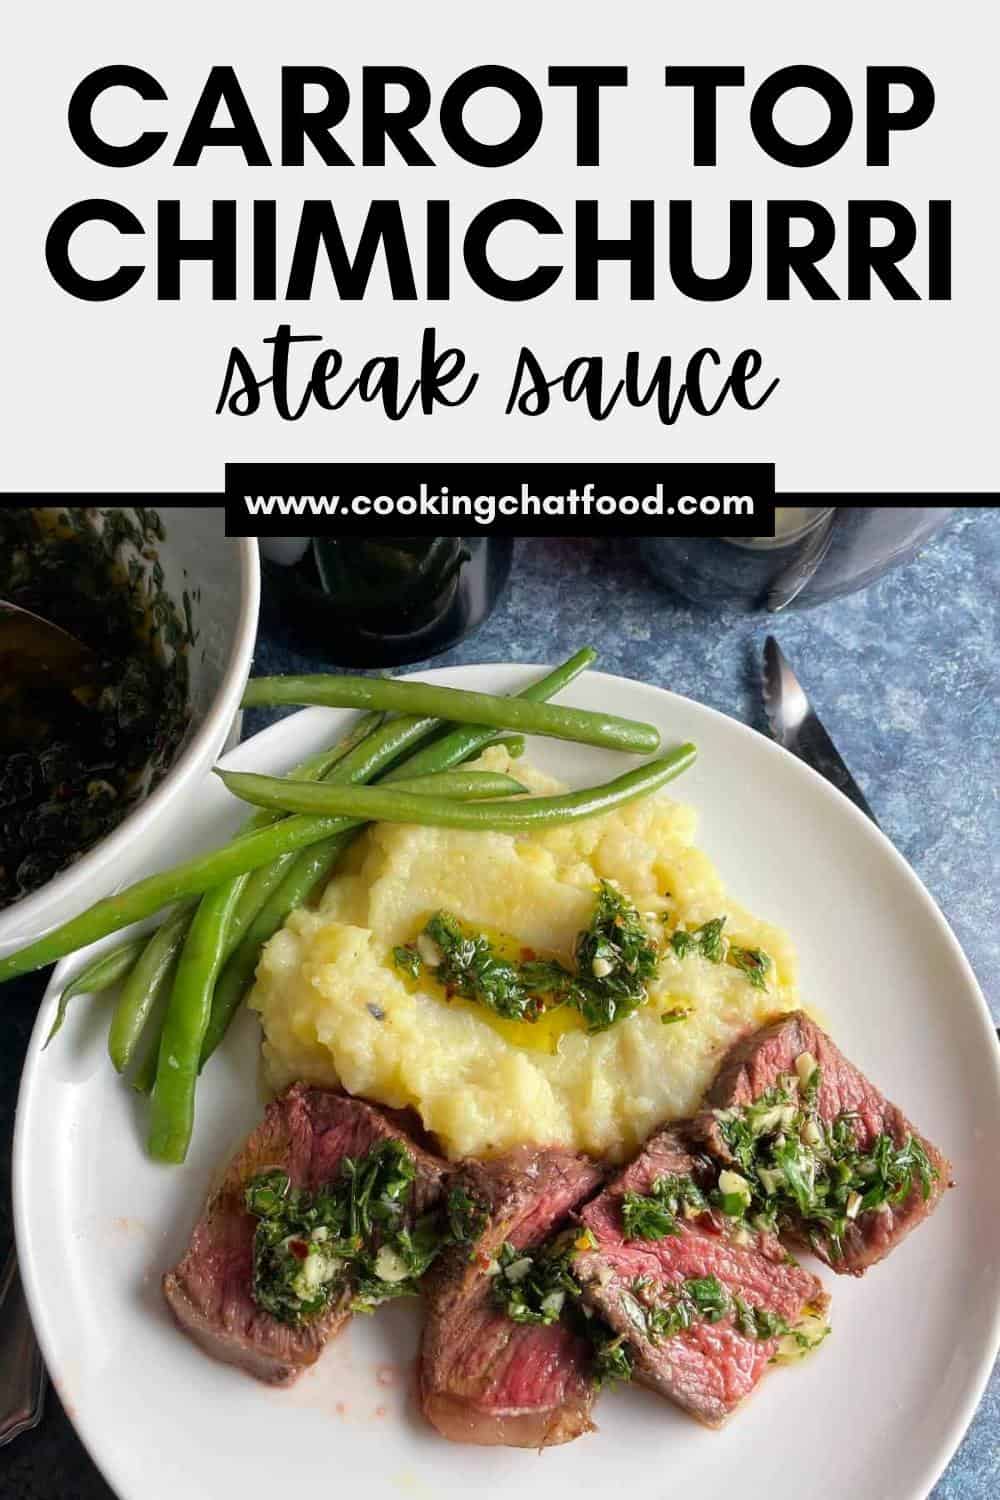 steak with carrot top chimichurri sauce, served with mashed potatoes and green beans.